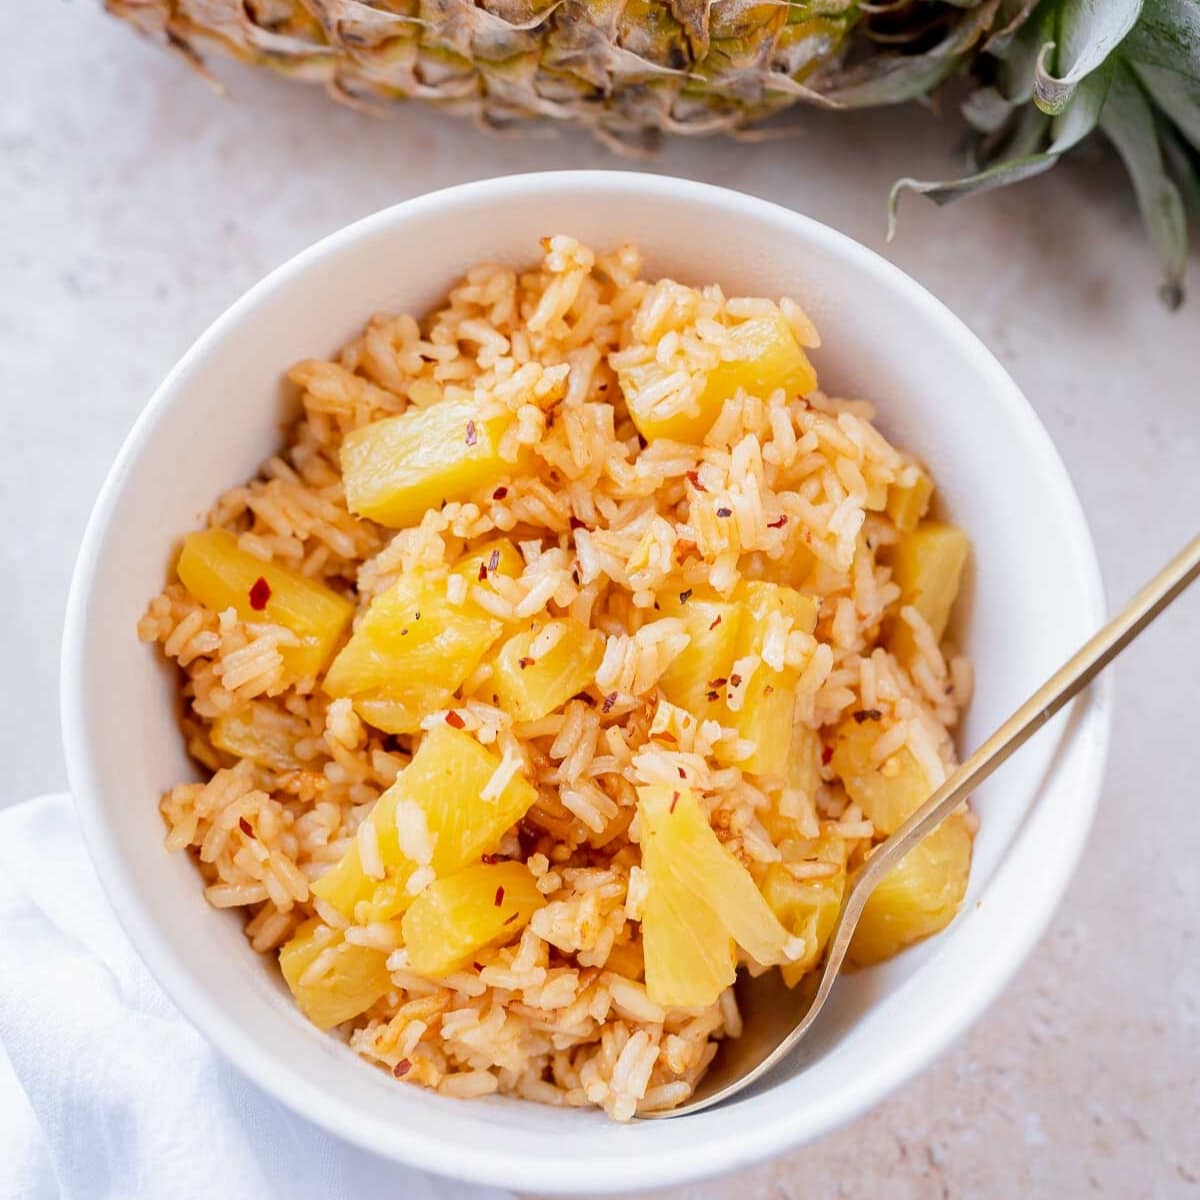 Pineapple and rice in a small ceramic white bowl.